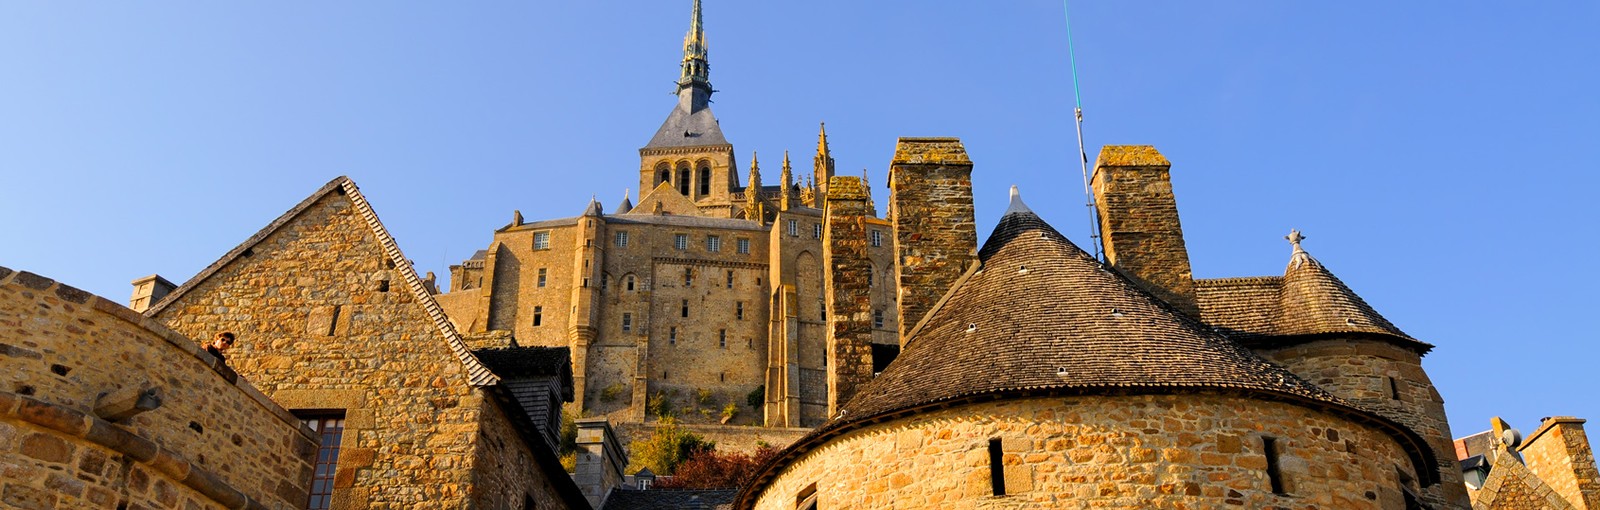 Tours Overnight to the Mont-Saint-Michel with a hike across the bay - Brittany - Multiday tours from Paris